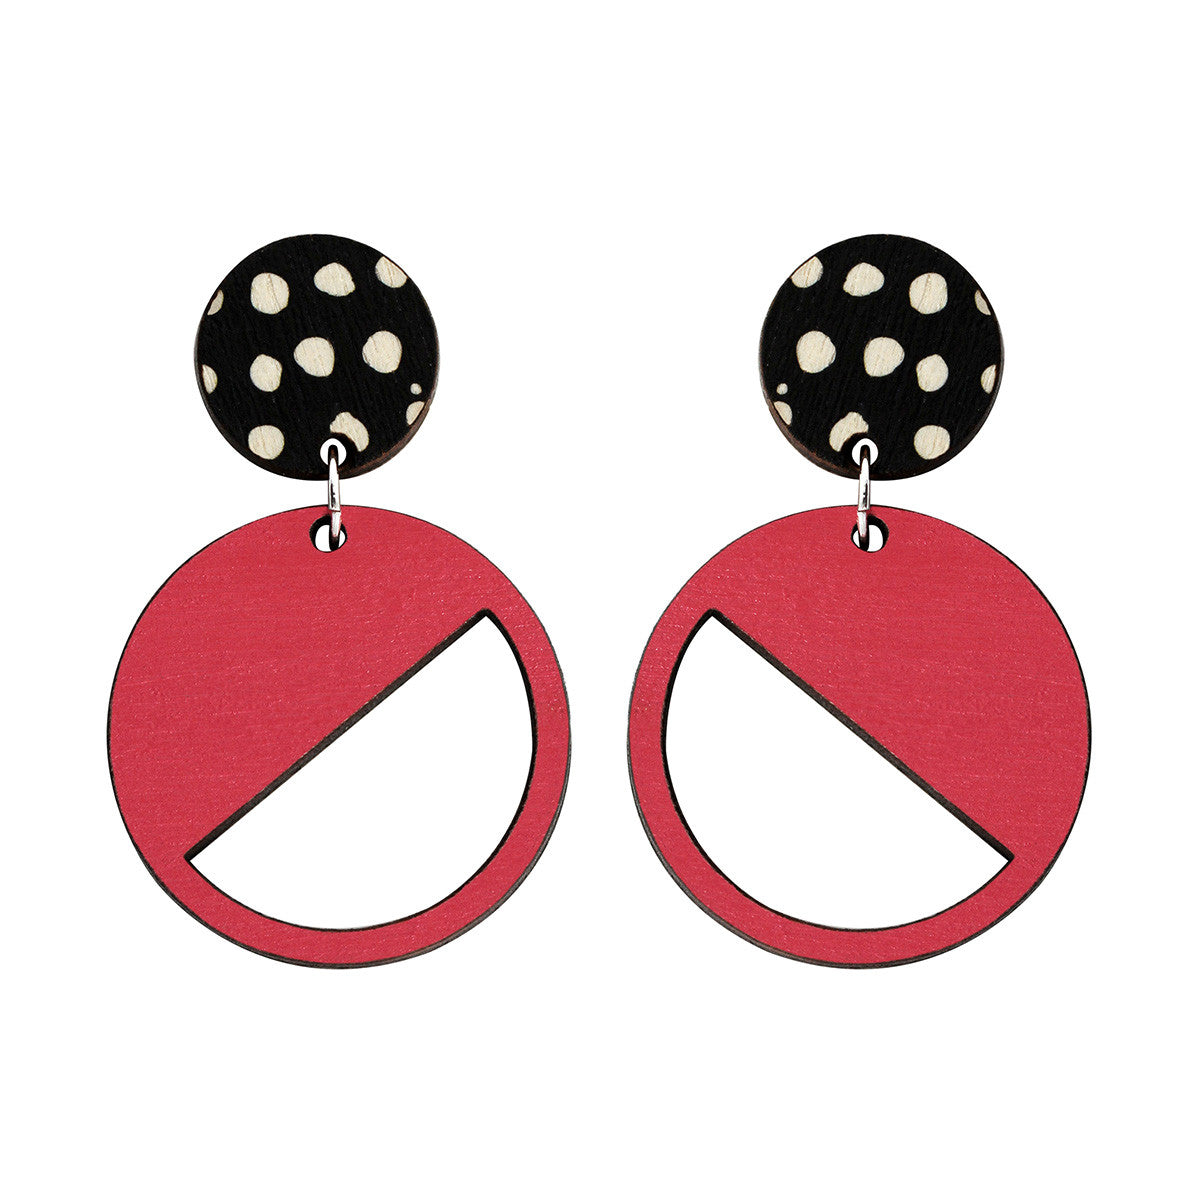 2 tiered earrings with spots in pink